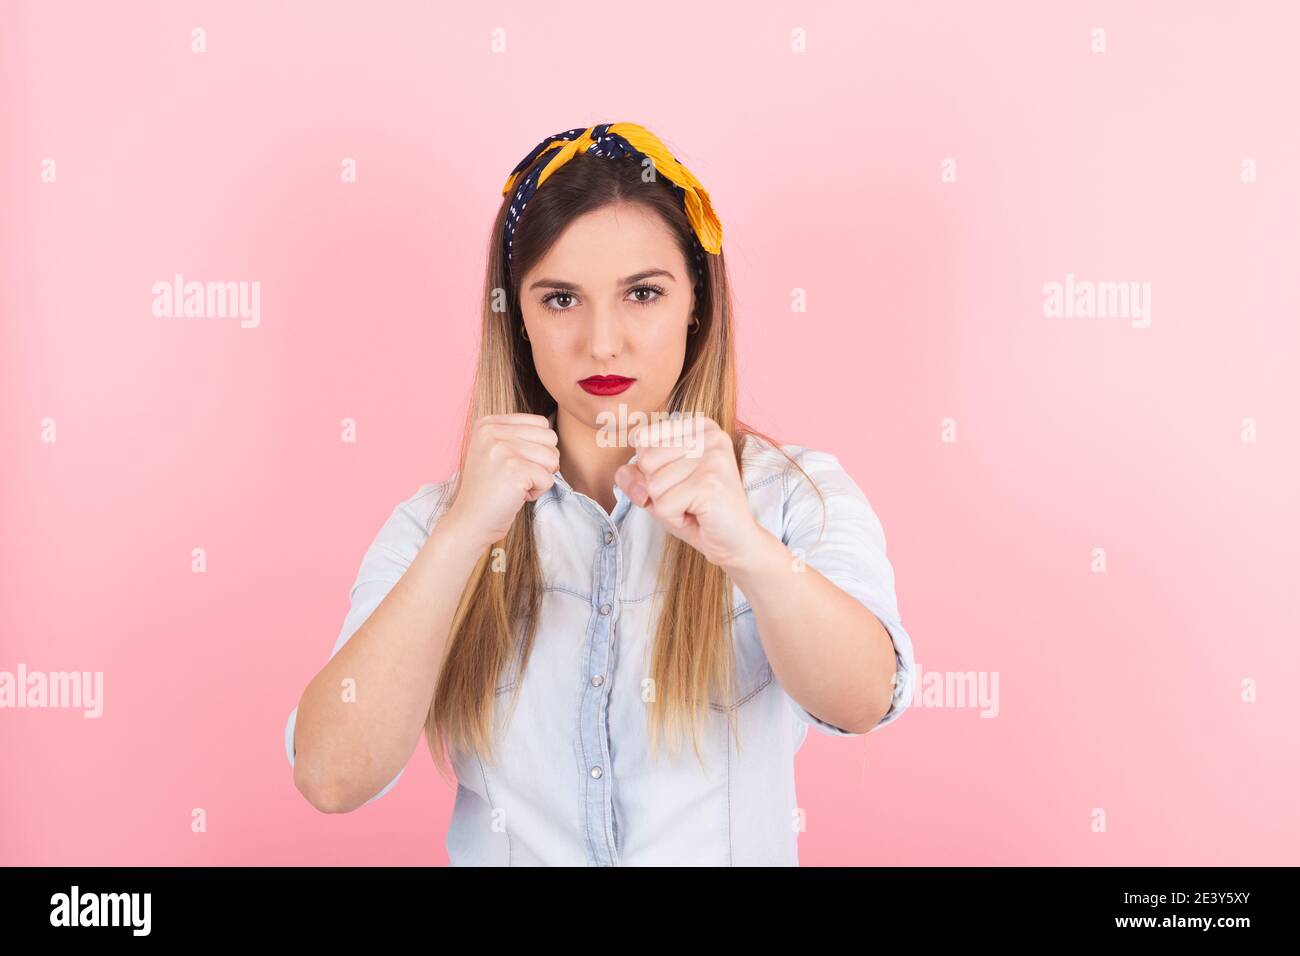 Young woman with her fists ready to fight and defend herself Stock Photo